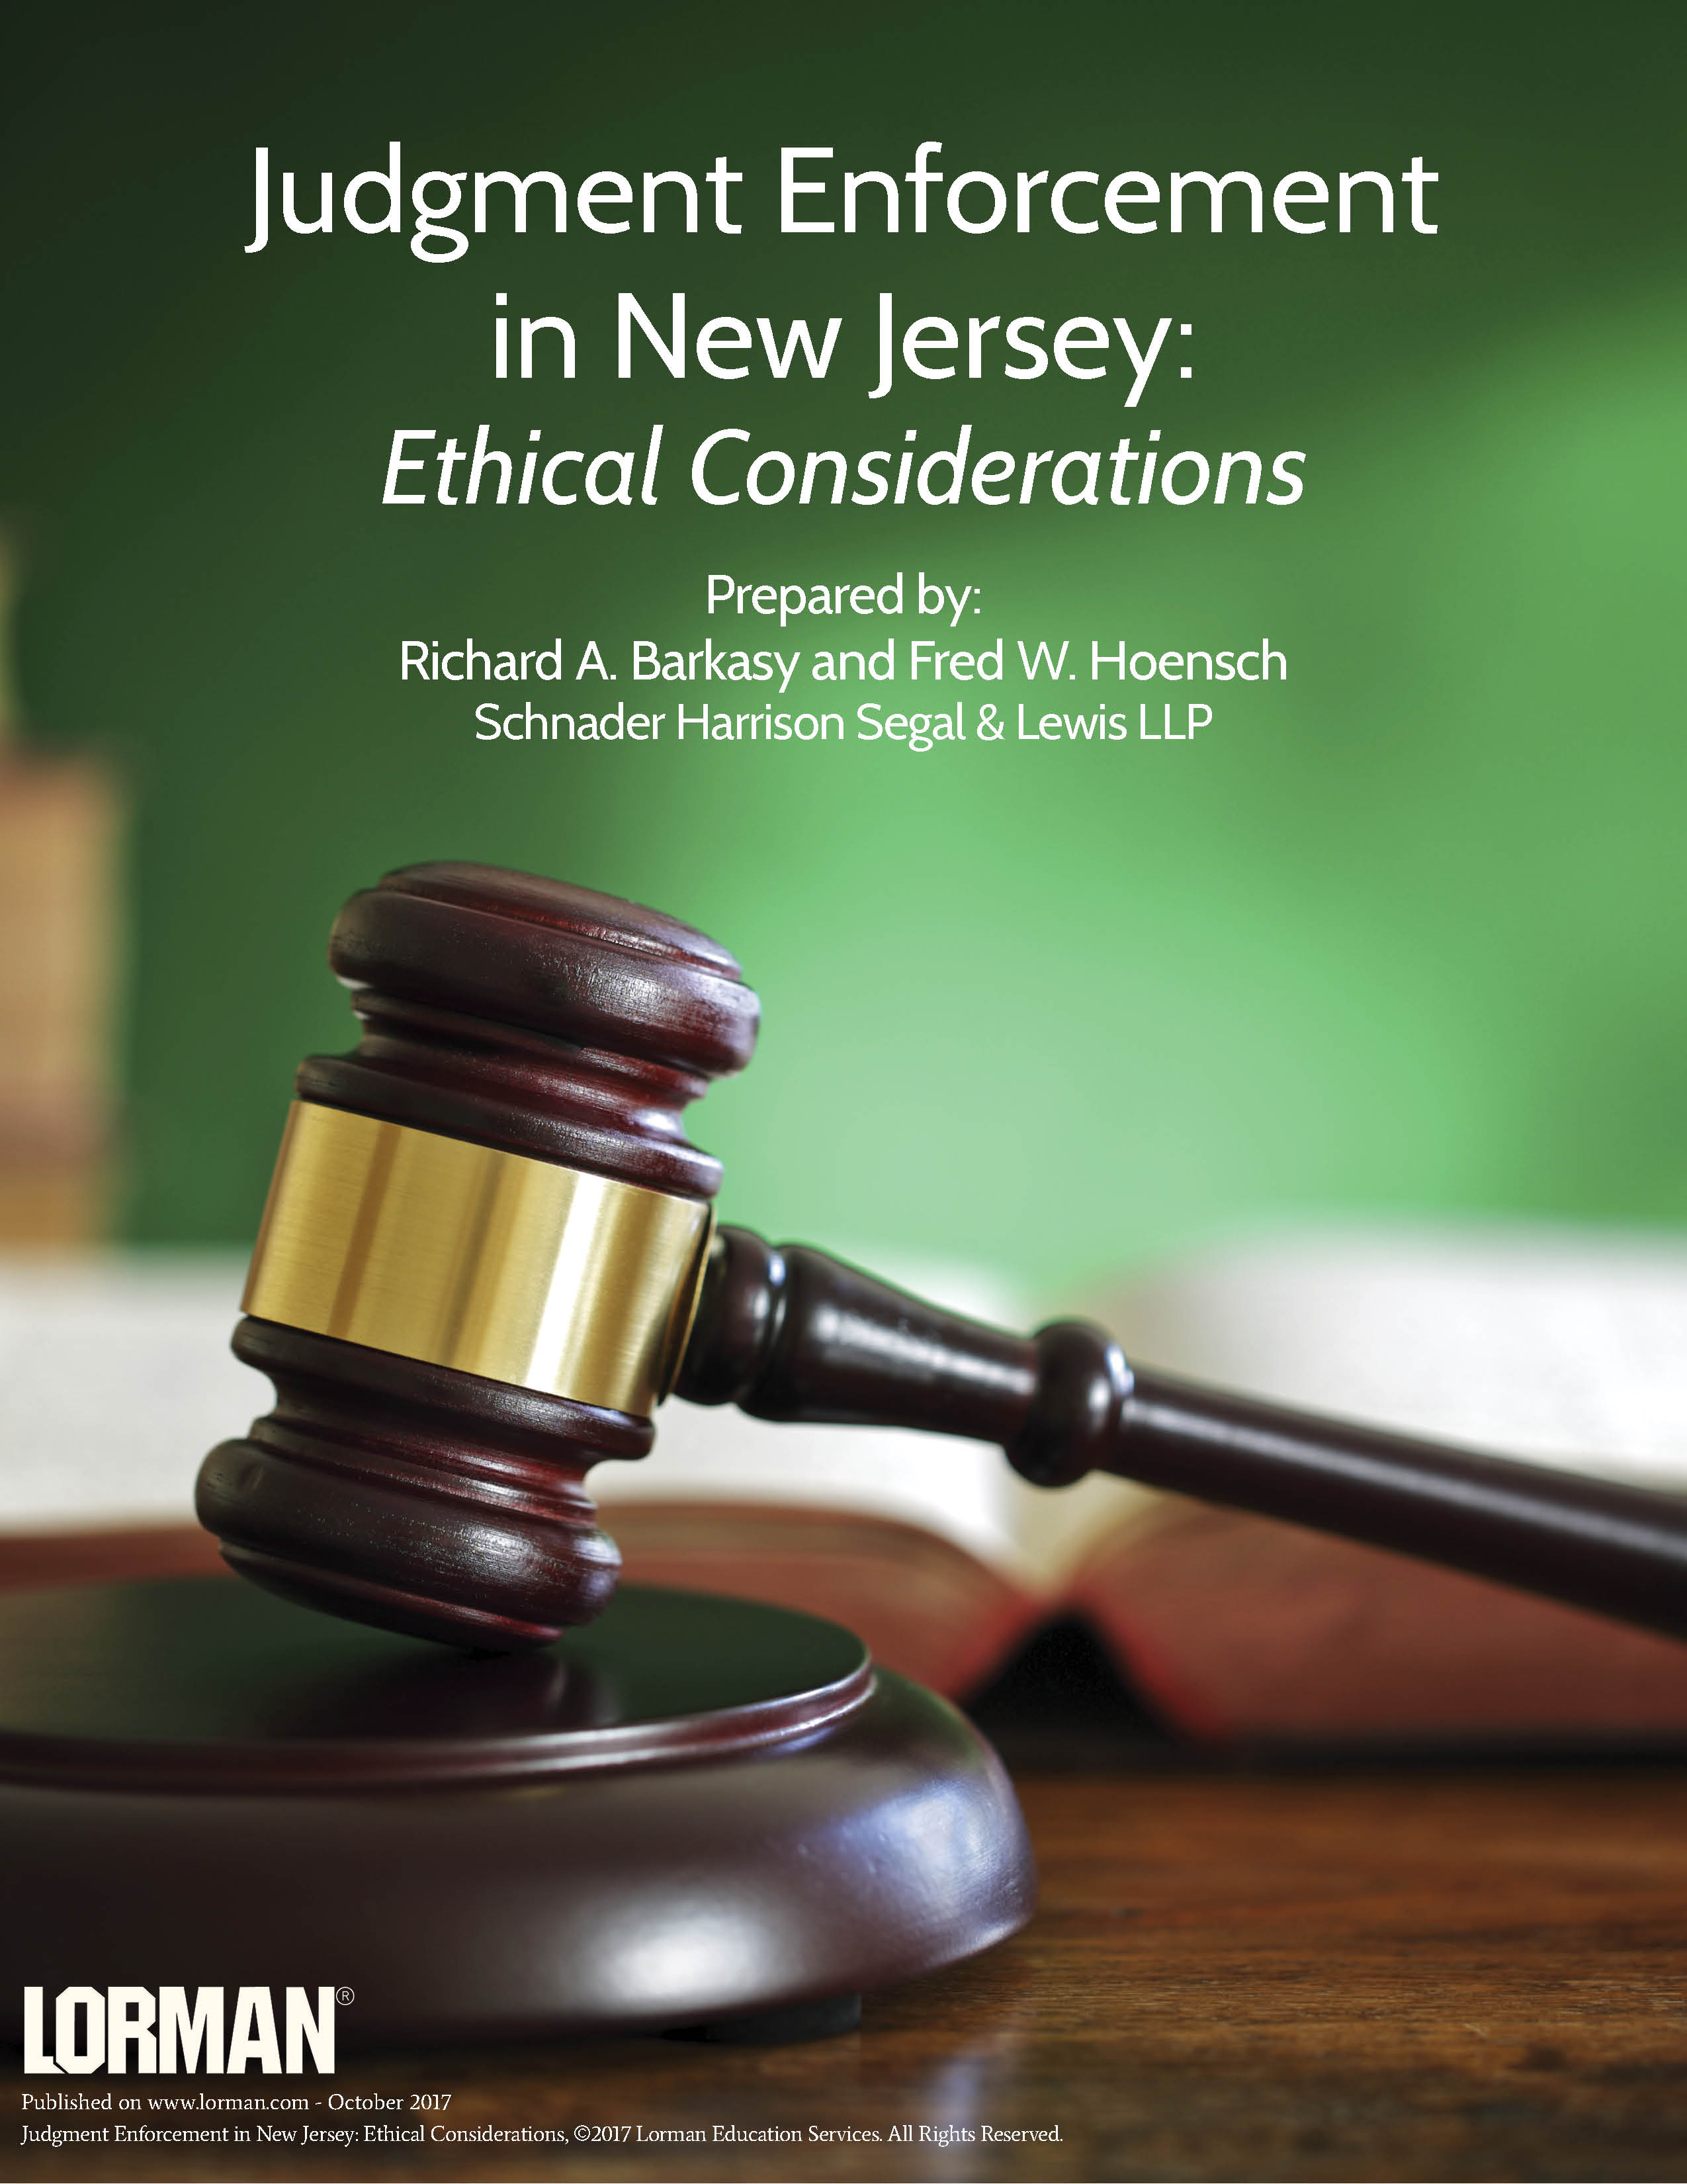 Judgment Enforcement in New Jersey: Ethical Considerations